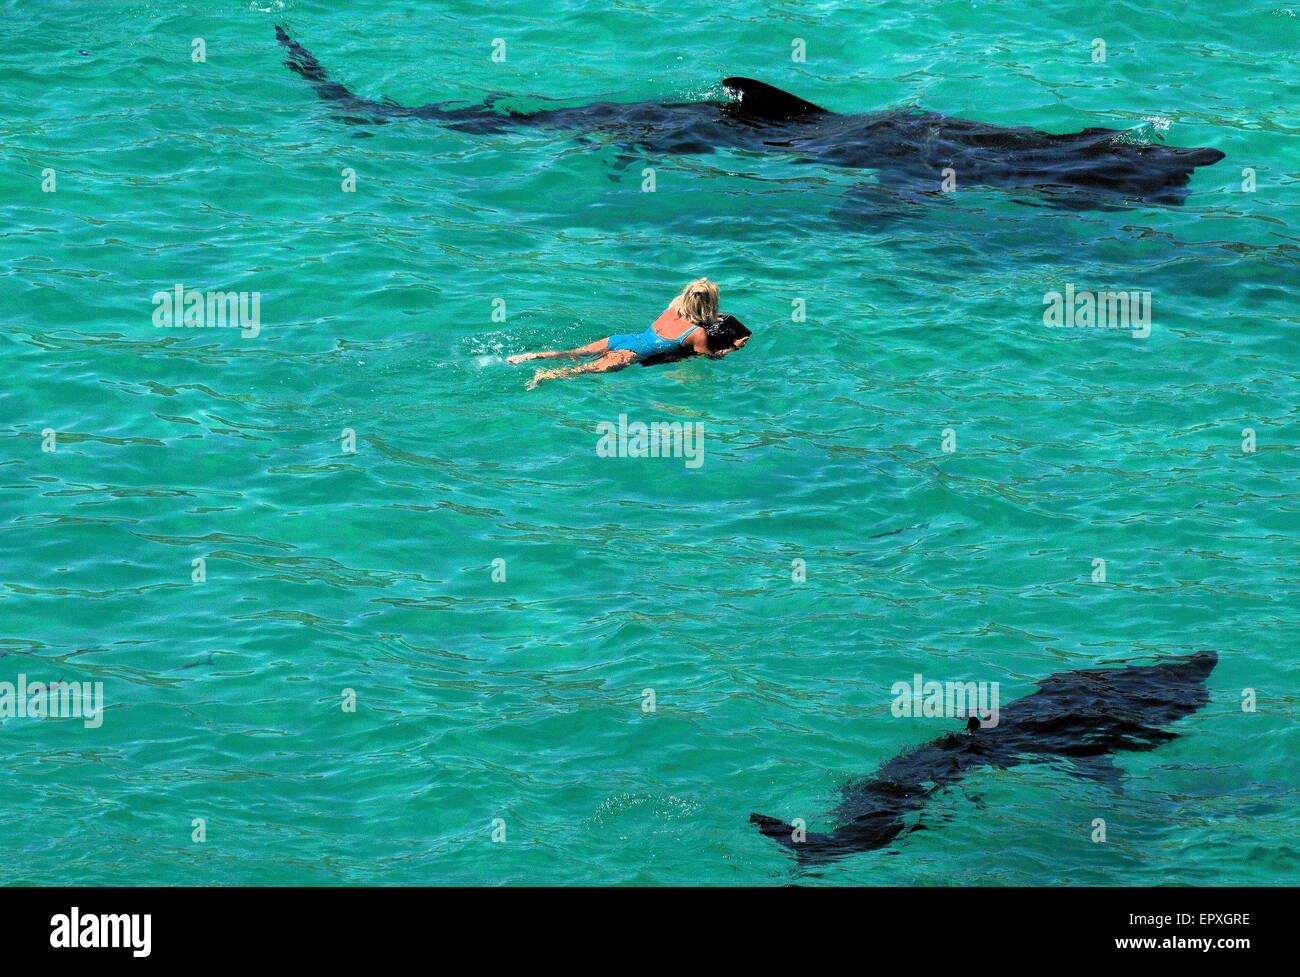 Giant sharks encircle vulnerable female swimmer in the sea off a Cornish beach. Stock Photo